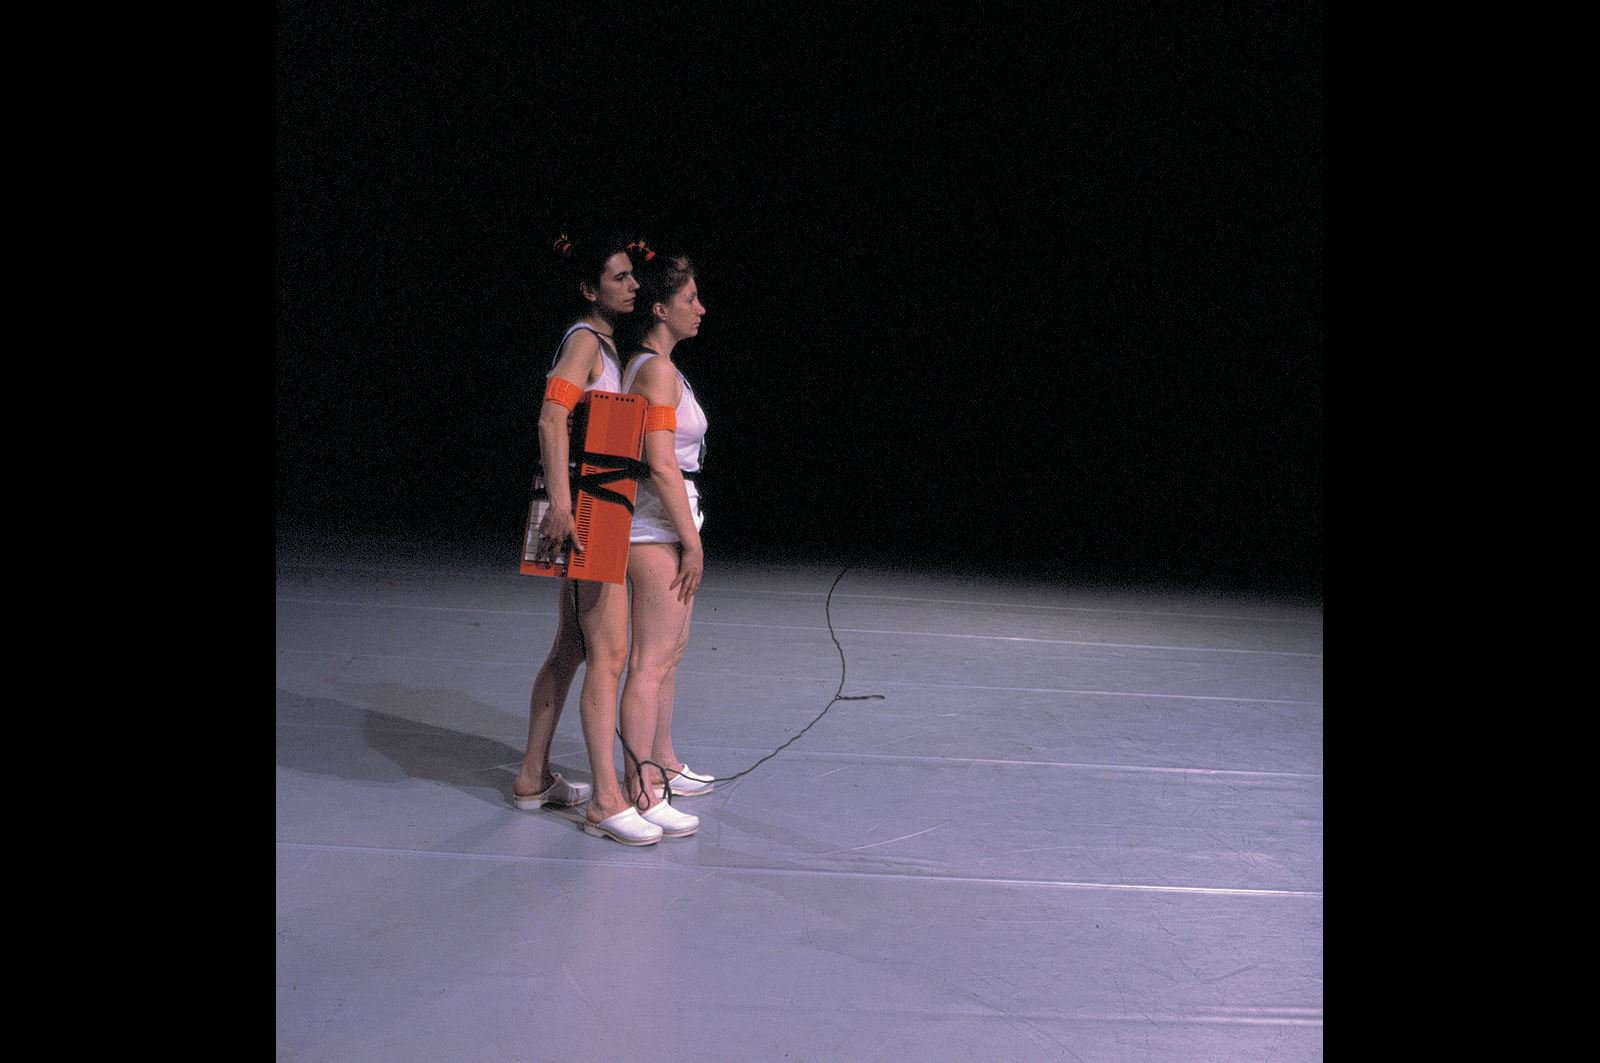 Performance view, Liliana Moro, Studio per un probabile equilibrio in movimento (Study for a likely balance in motion), with Giovanna Lué, realised during the theatre performance Canti marini 1 e 2 by Virgilio Sieni, 1997